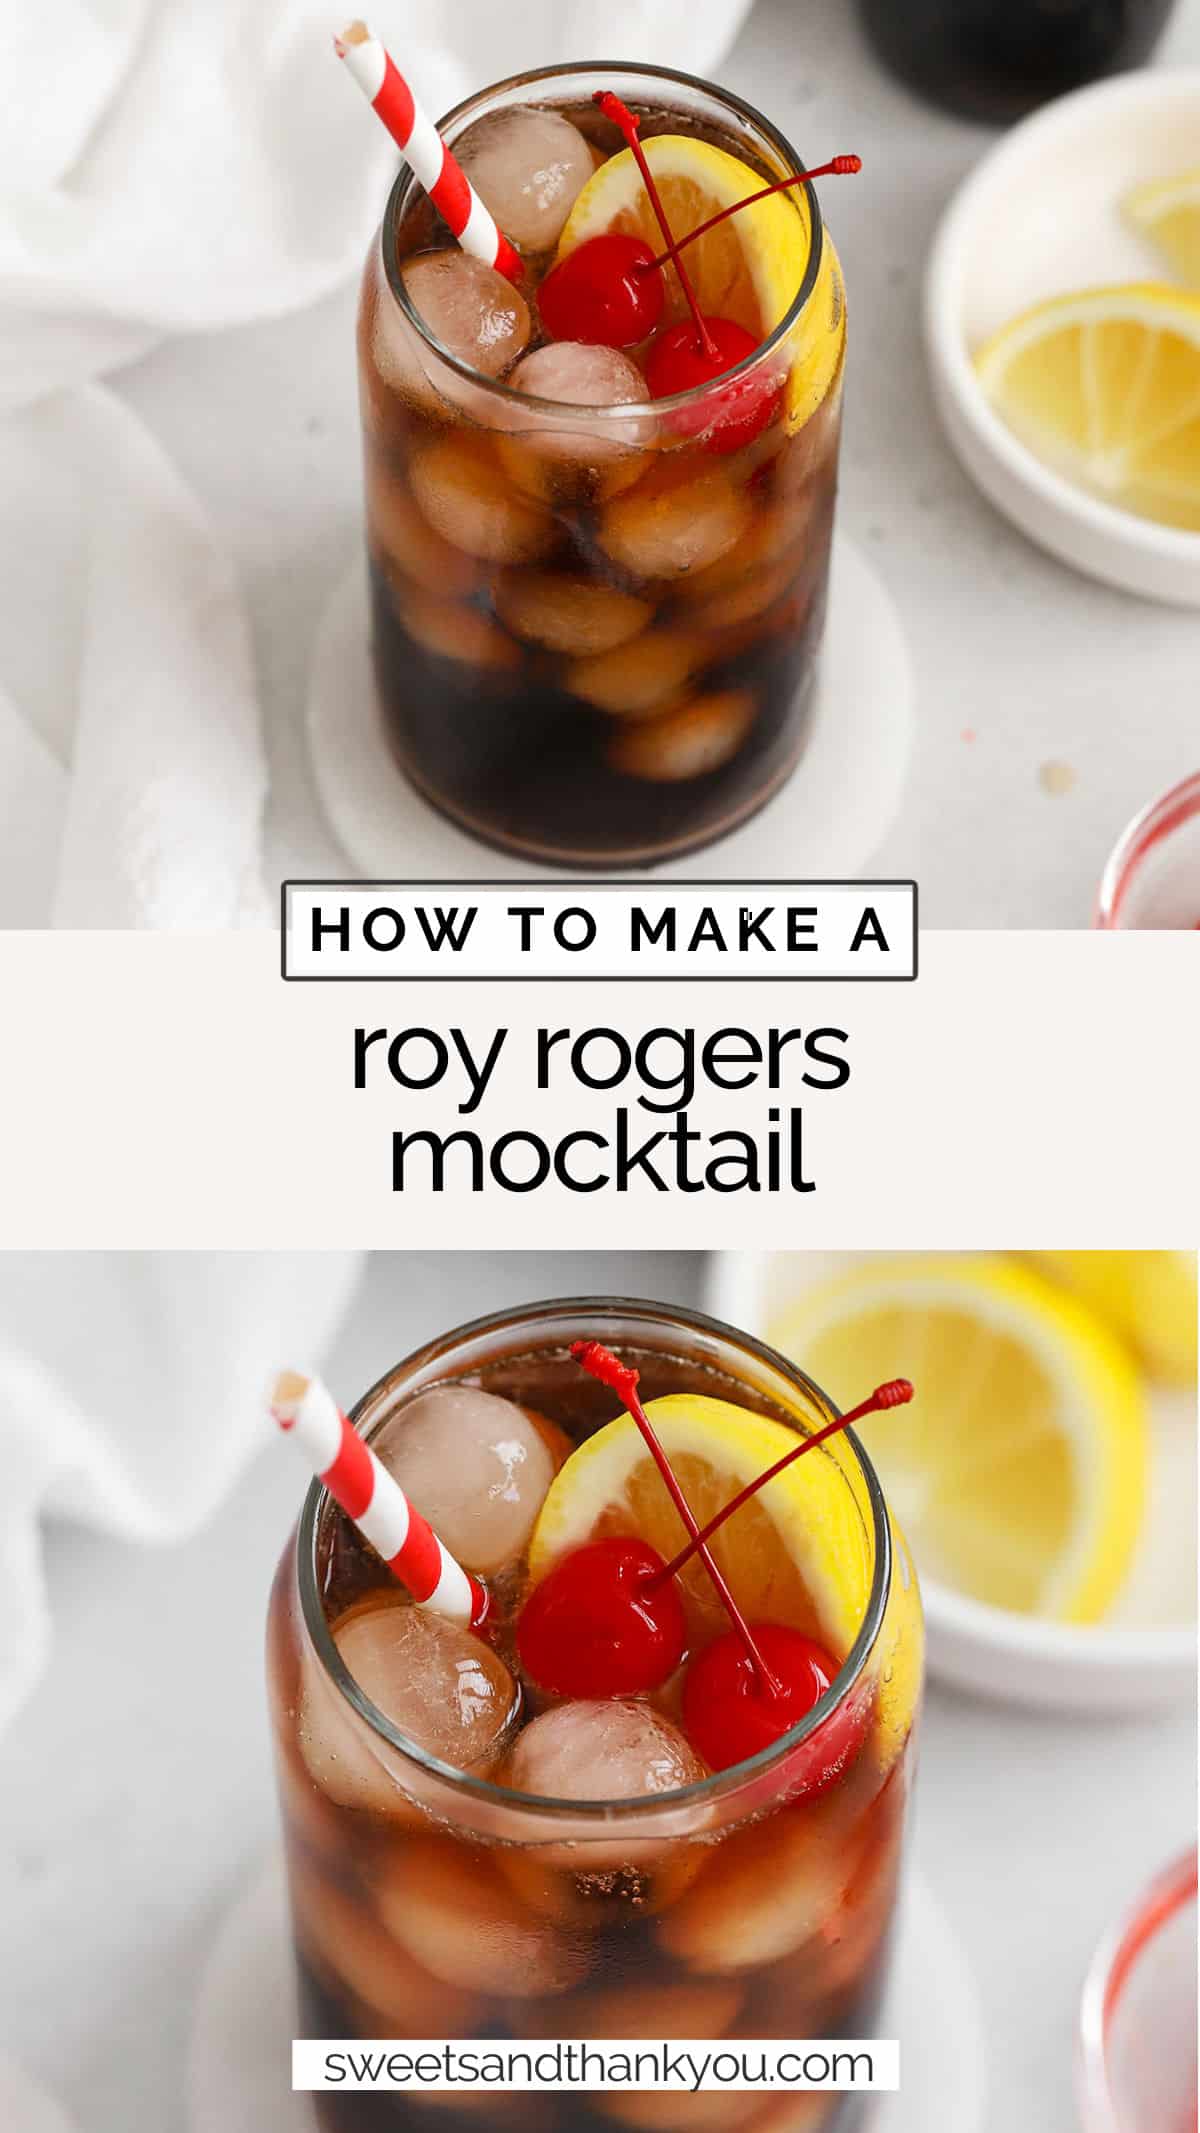 Learn how to make a Roy Rogers drink! This classic mocktail recipe is made with just 2-3 ingredients and makes a fun addition to parties and celebrations. // Roy Rogers cocktail recipe / Roy Rogers mocktail / cola mocktails / soda mocktails / grenadine mocktails / kid friendly drinks / non-alcoholic drink recipe / classic mocktail recipe / soda drink / 